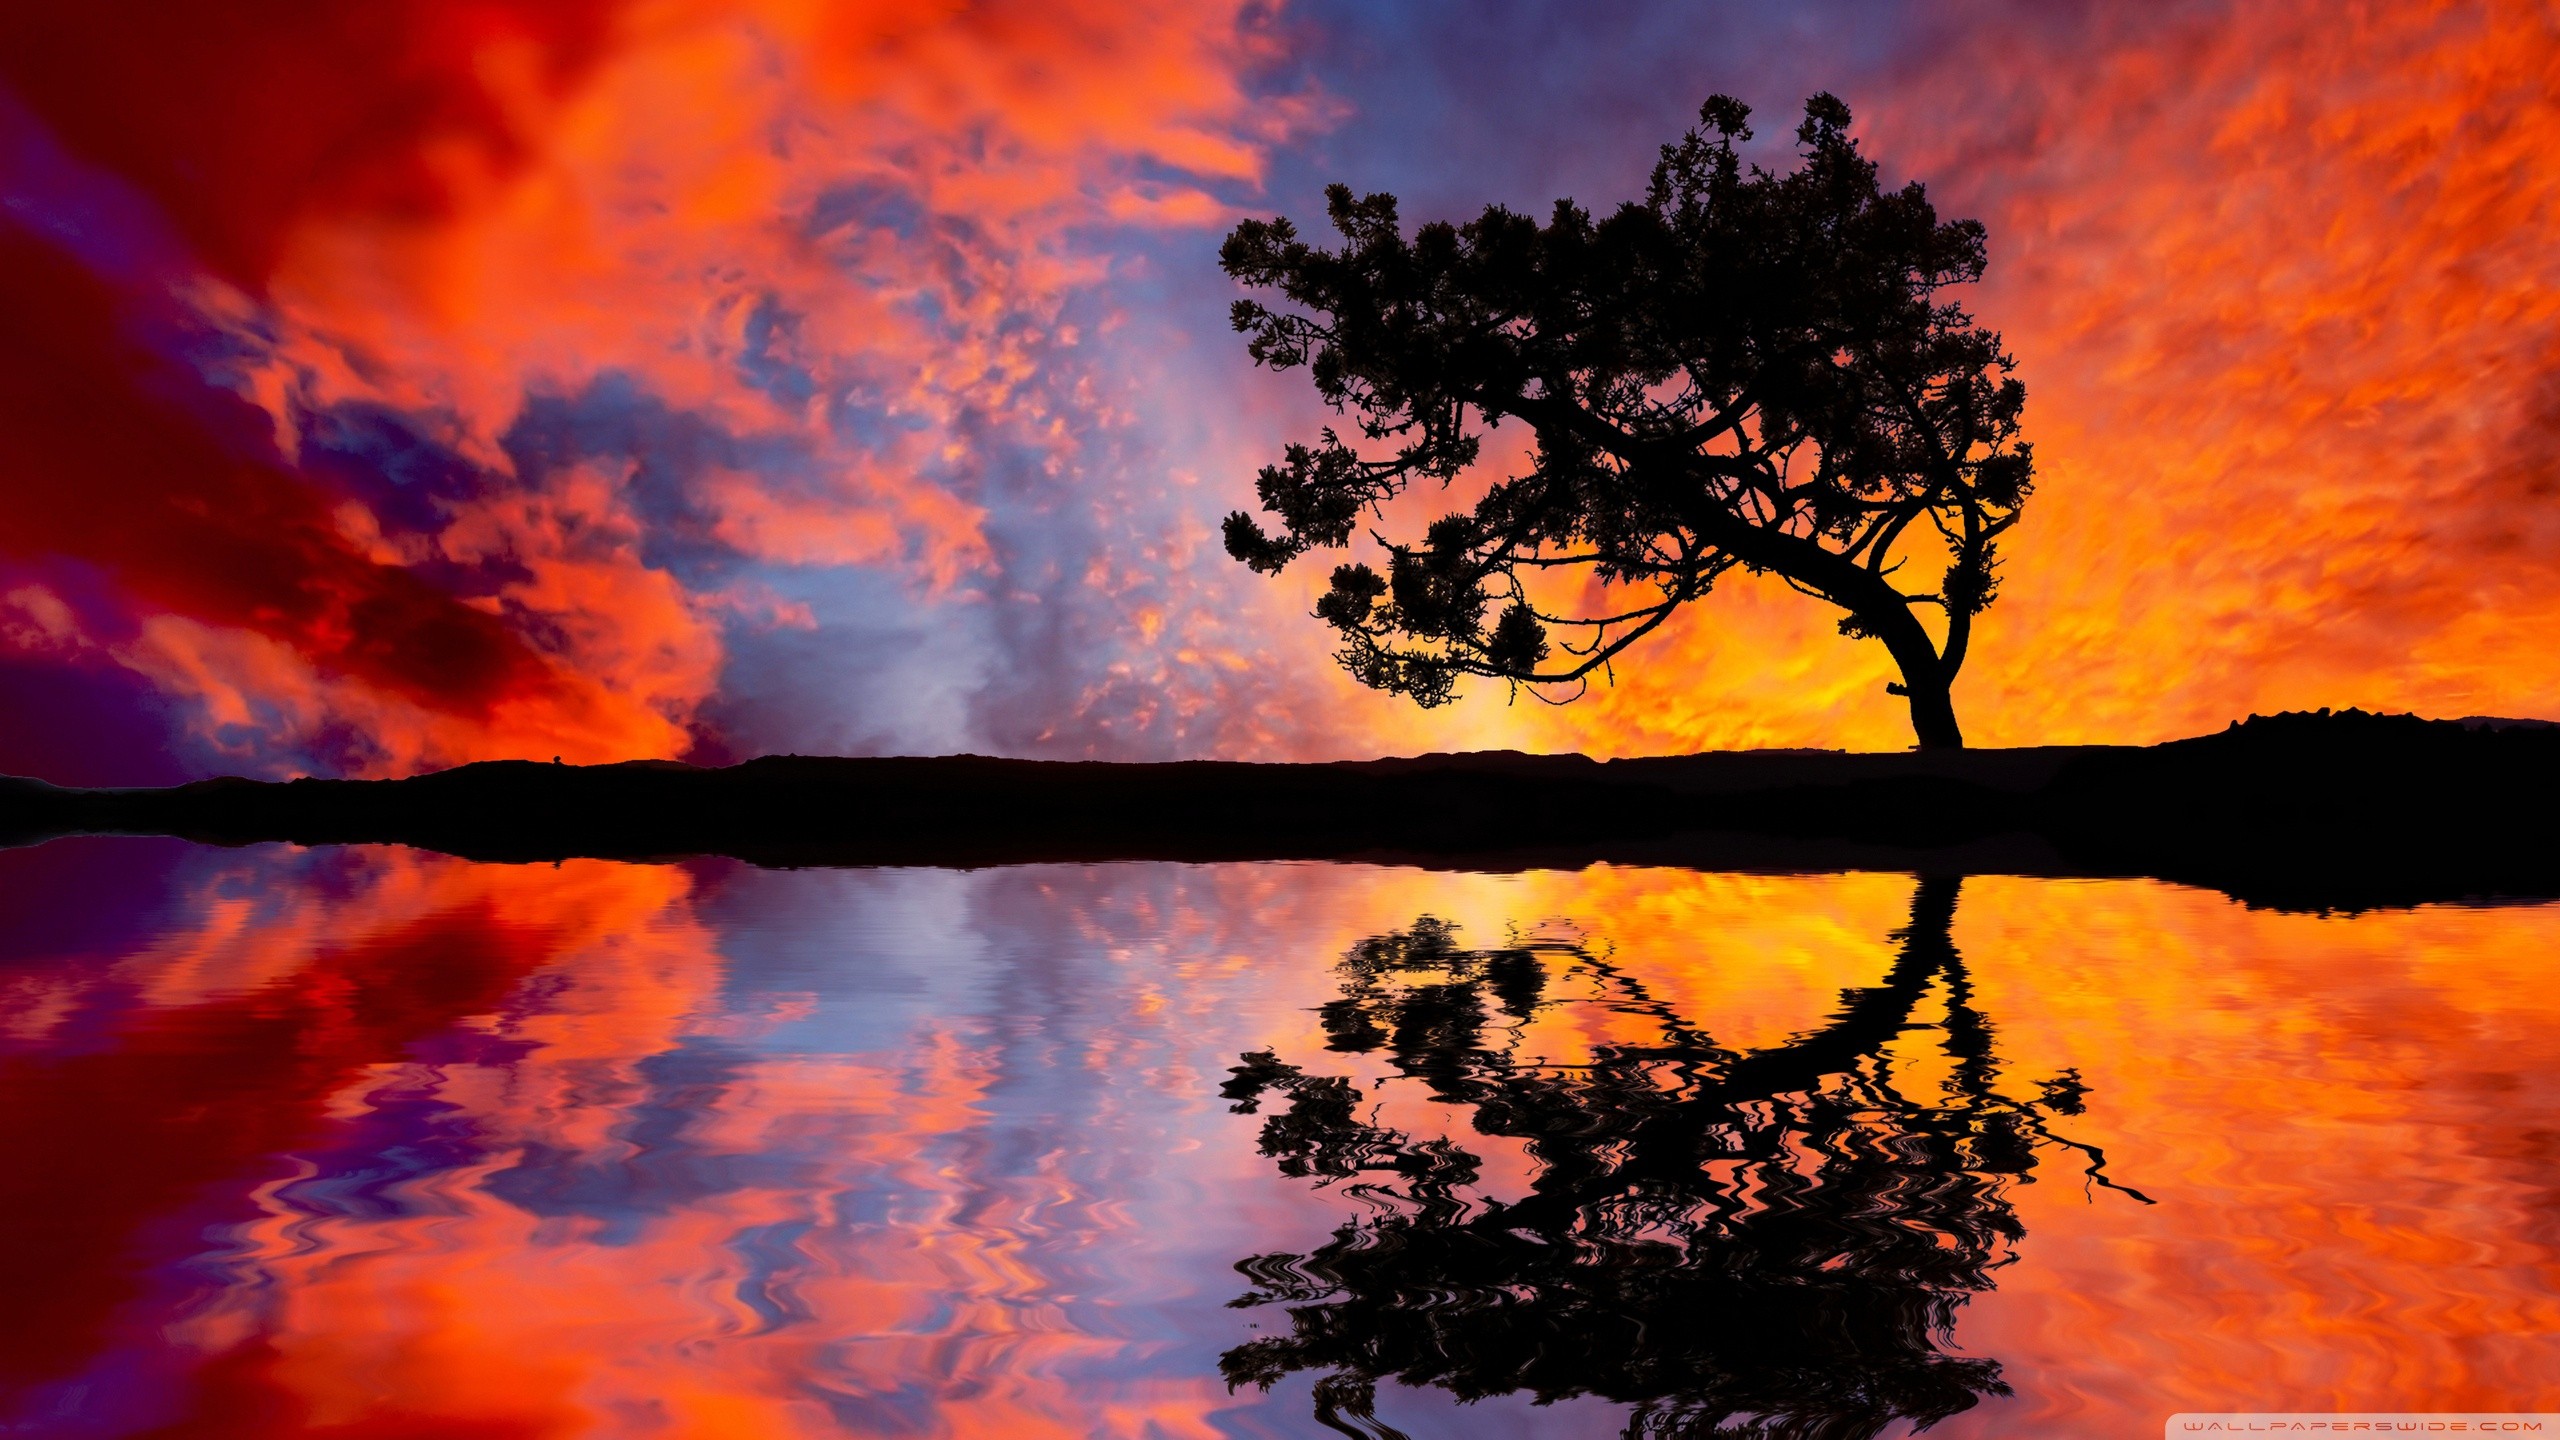 General 2560x1440 reflection clouds trees sky landscape low light watermarked